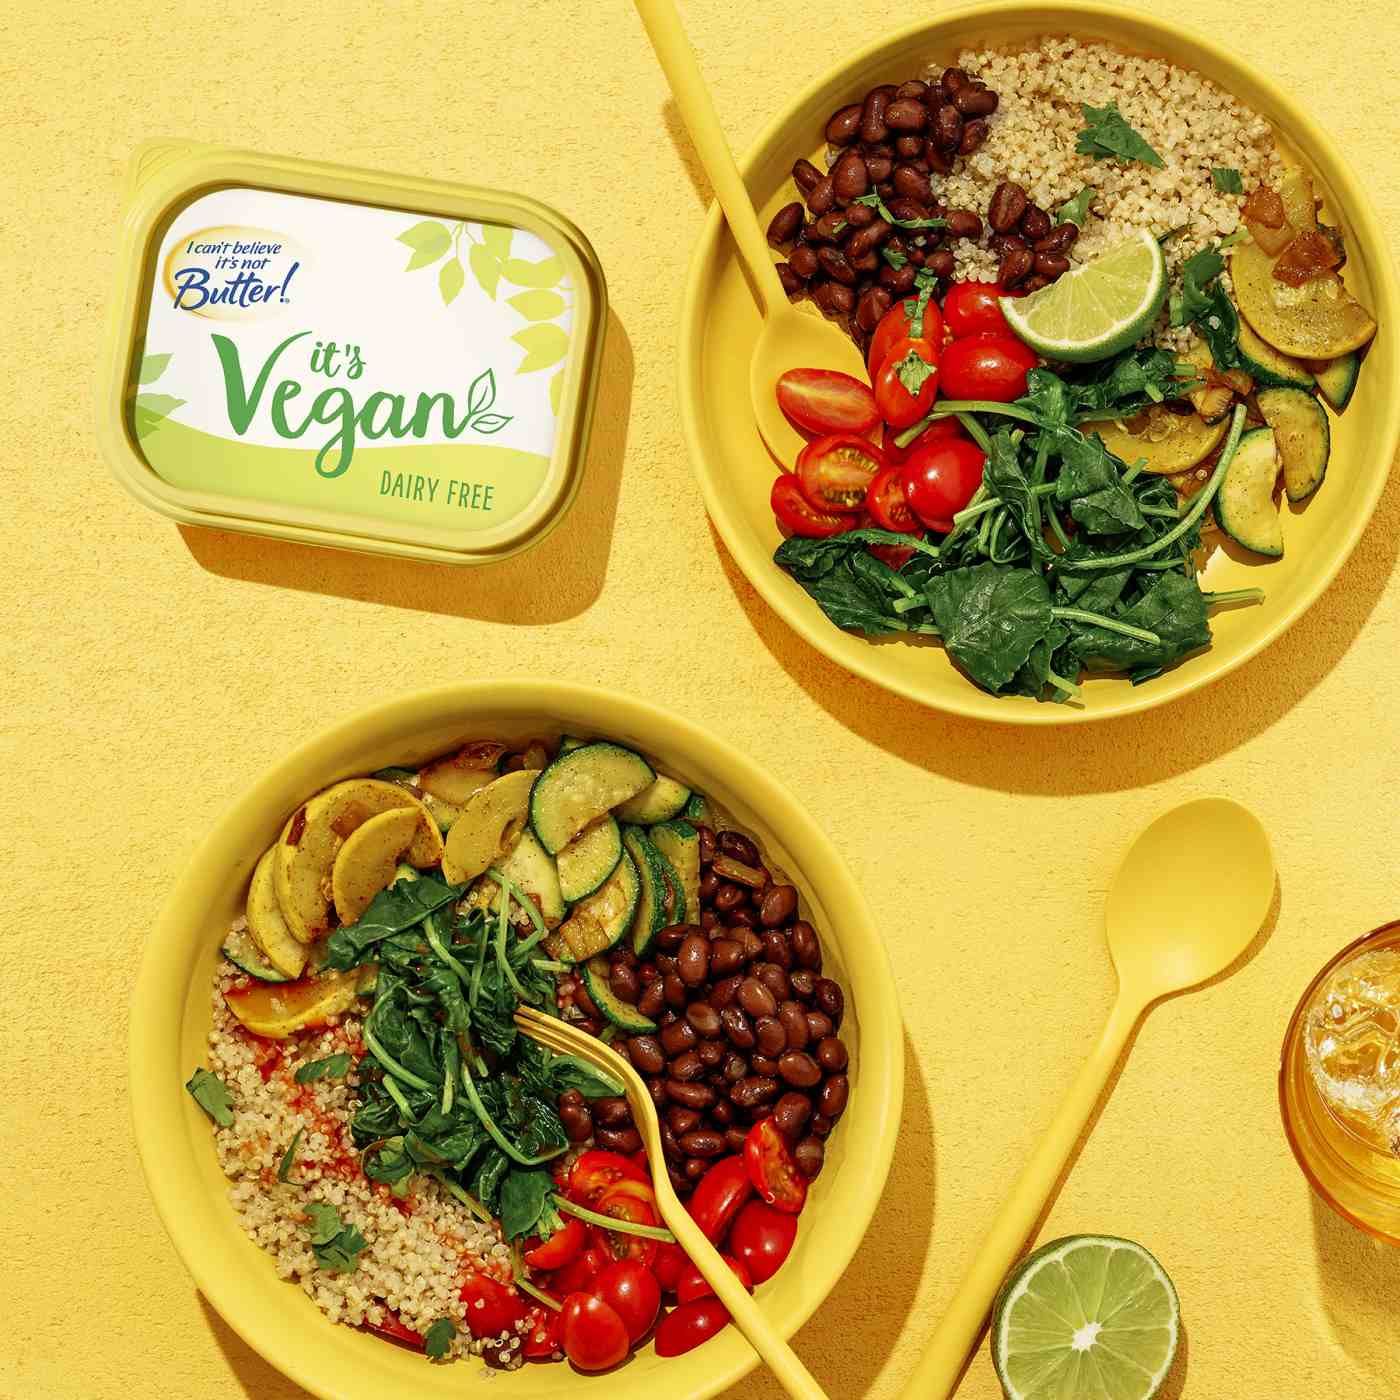 I Can't Believe It's Not Butter! Vegan Spread; image 7 of 9